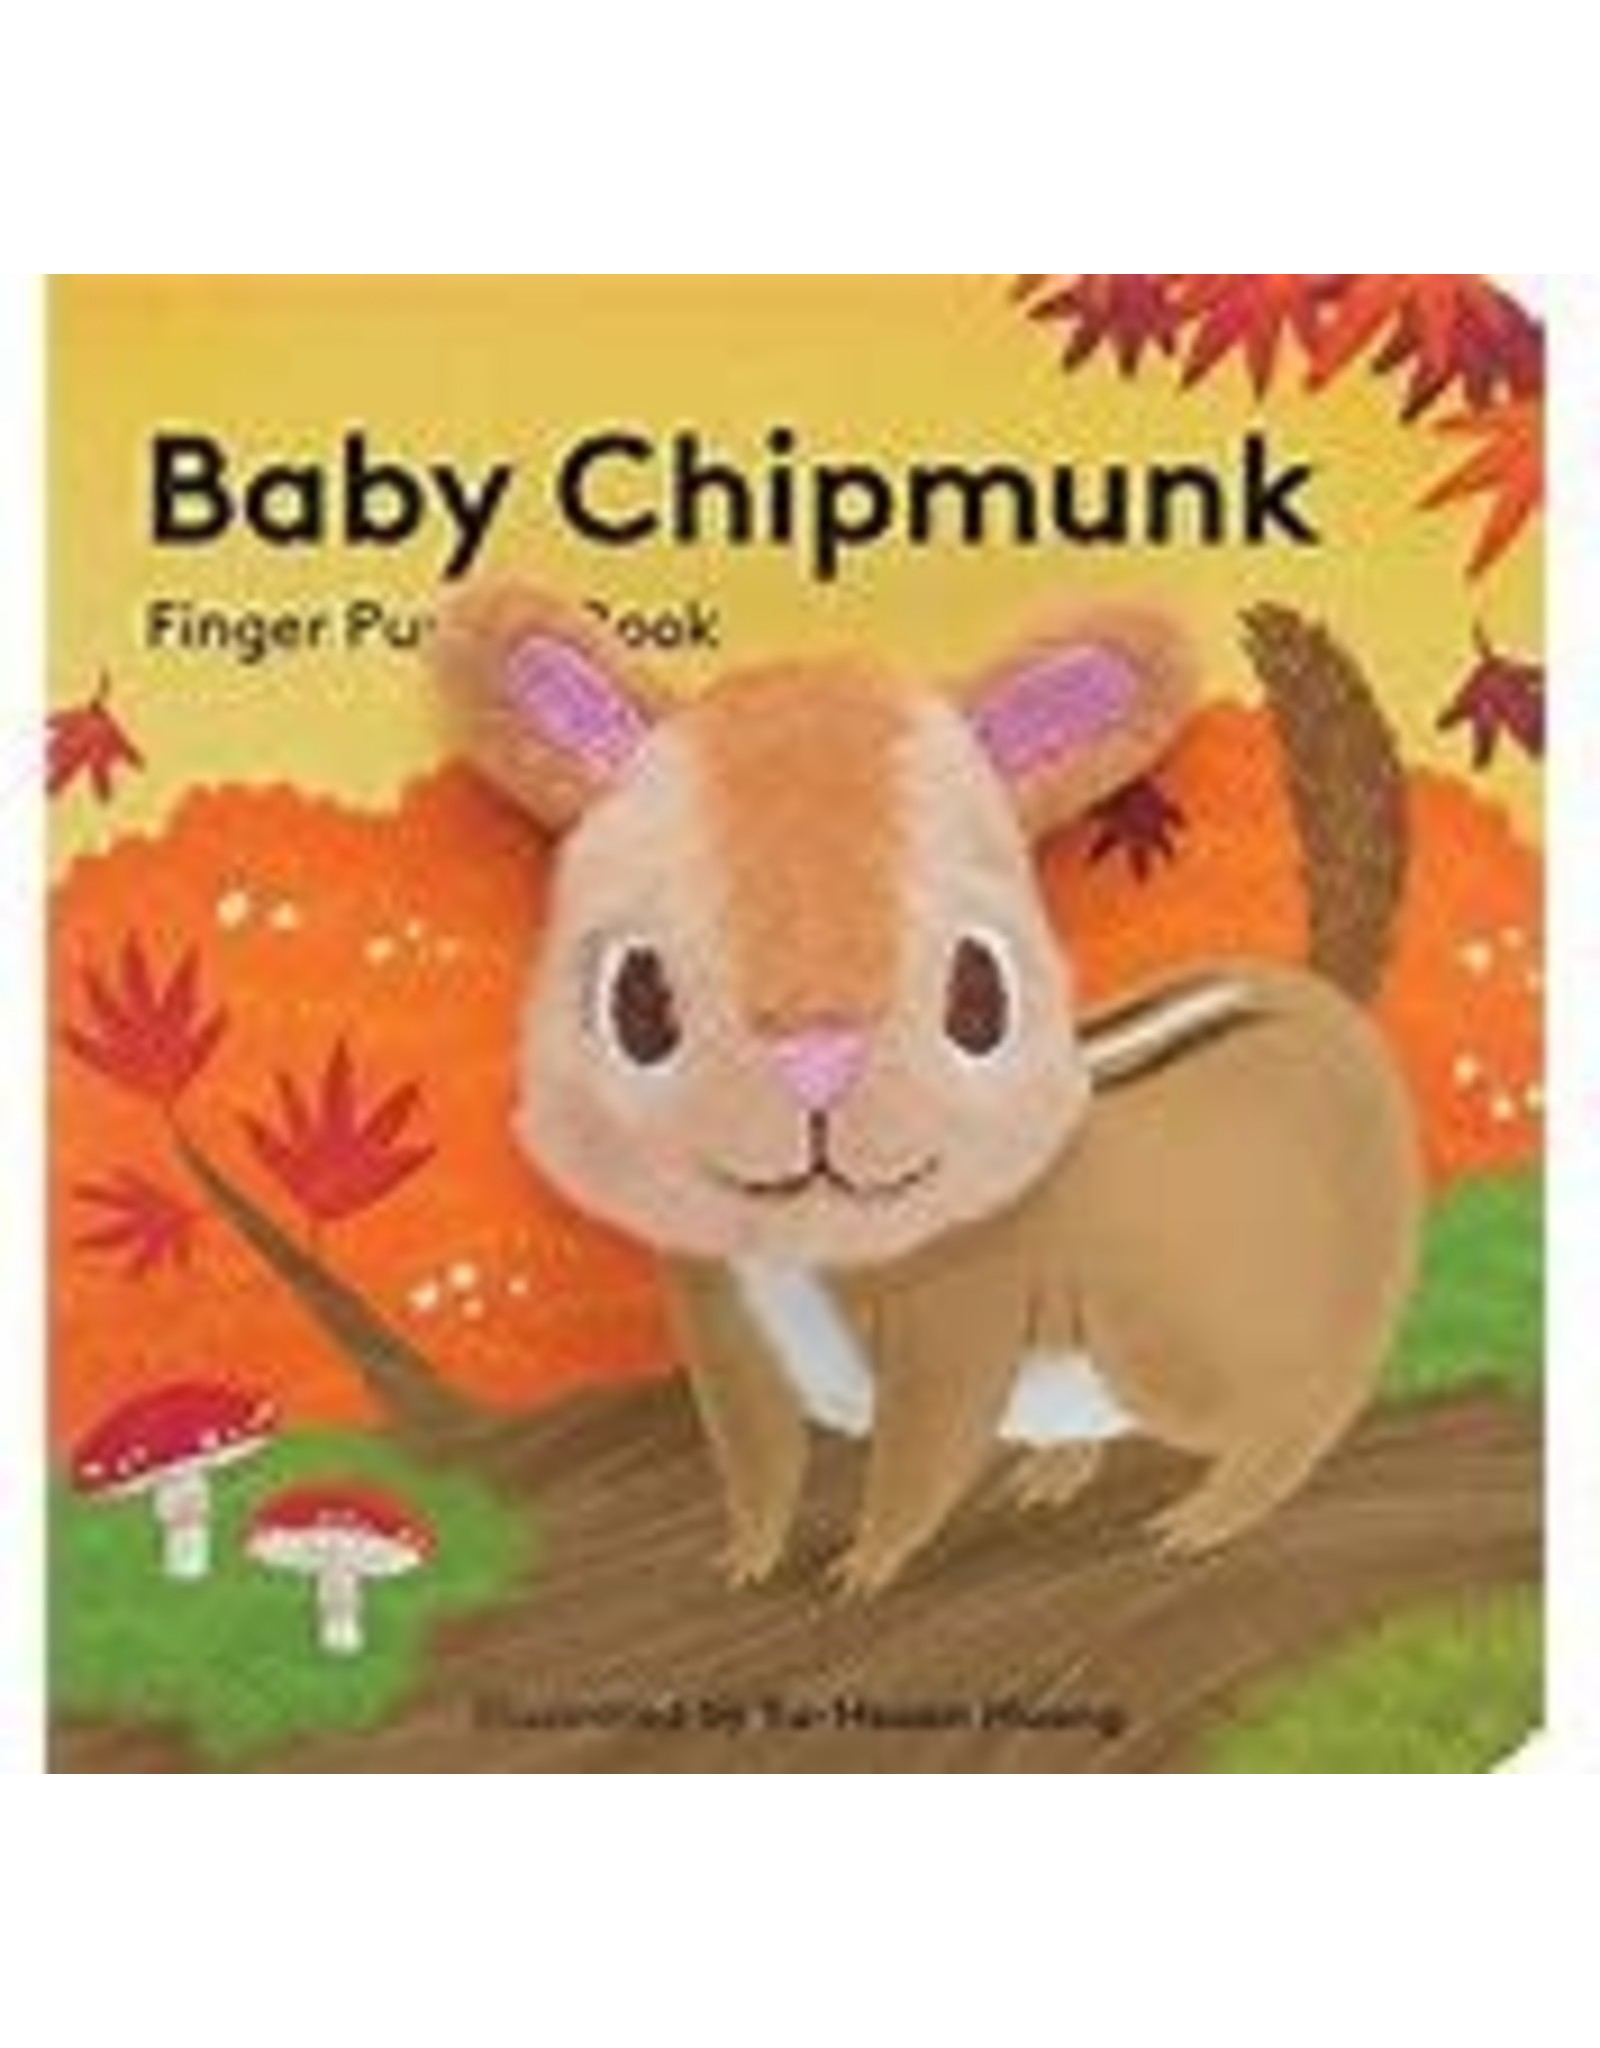 Chronicle Baby Chipmunk: finger puppet book